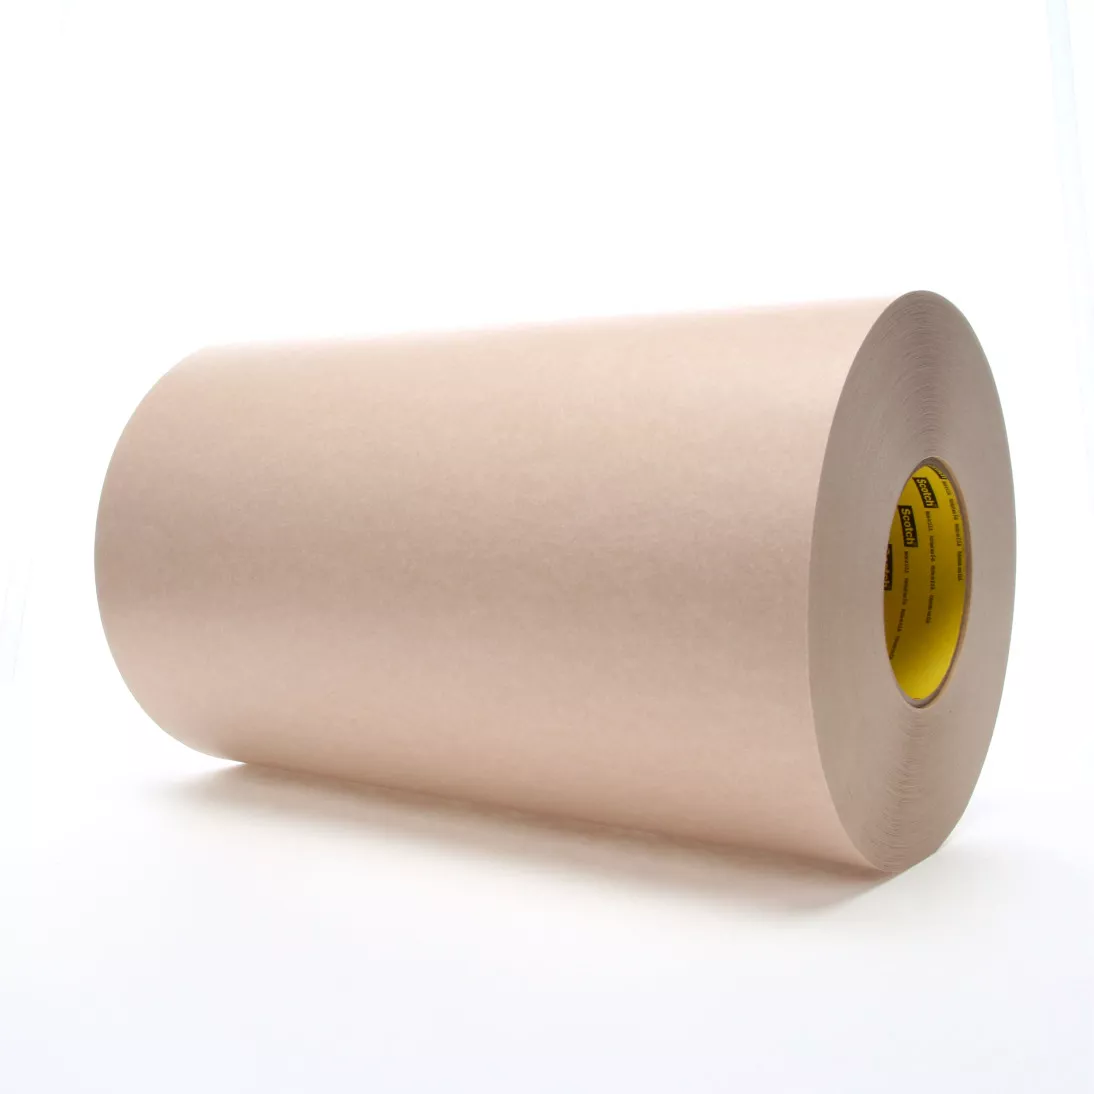 3M™ Heavy Duty Protective Tape 346, Tan, 304 mm x 54.8 m, 16.7 mil, 1 Roll/Case